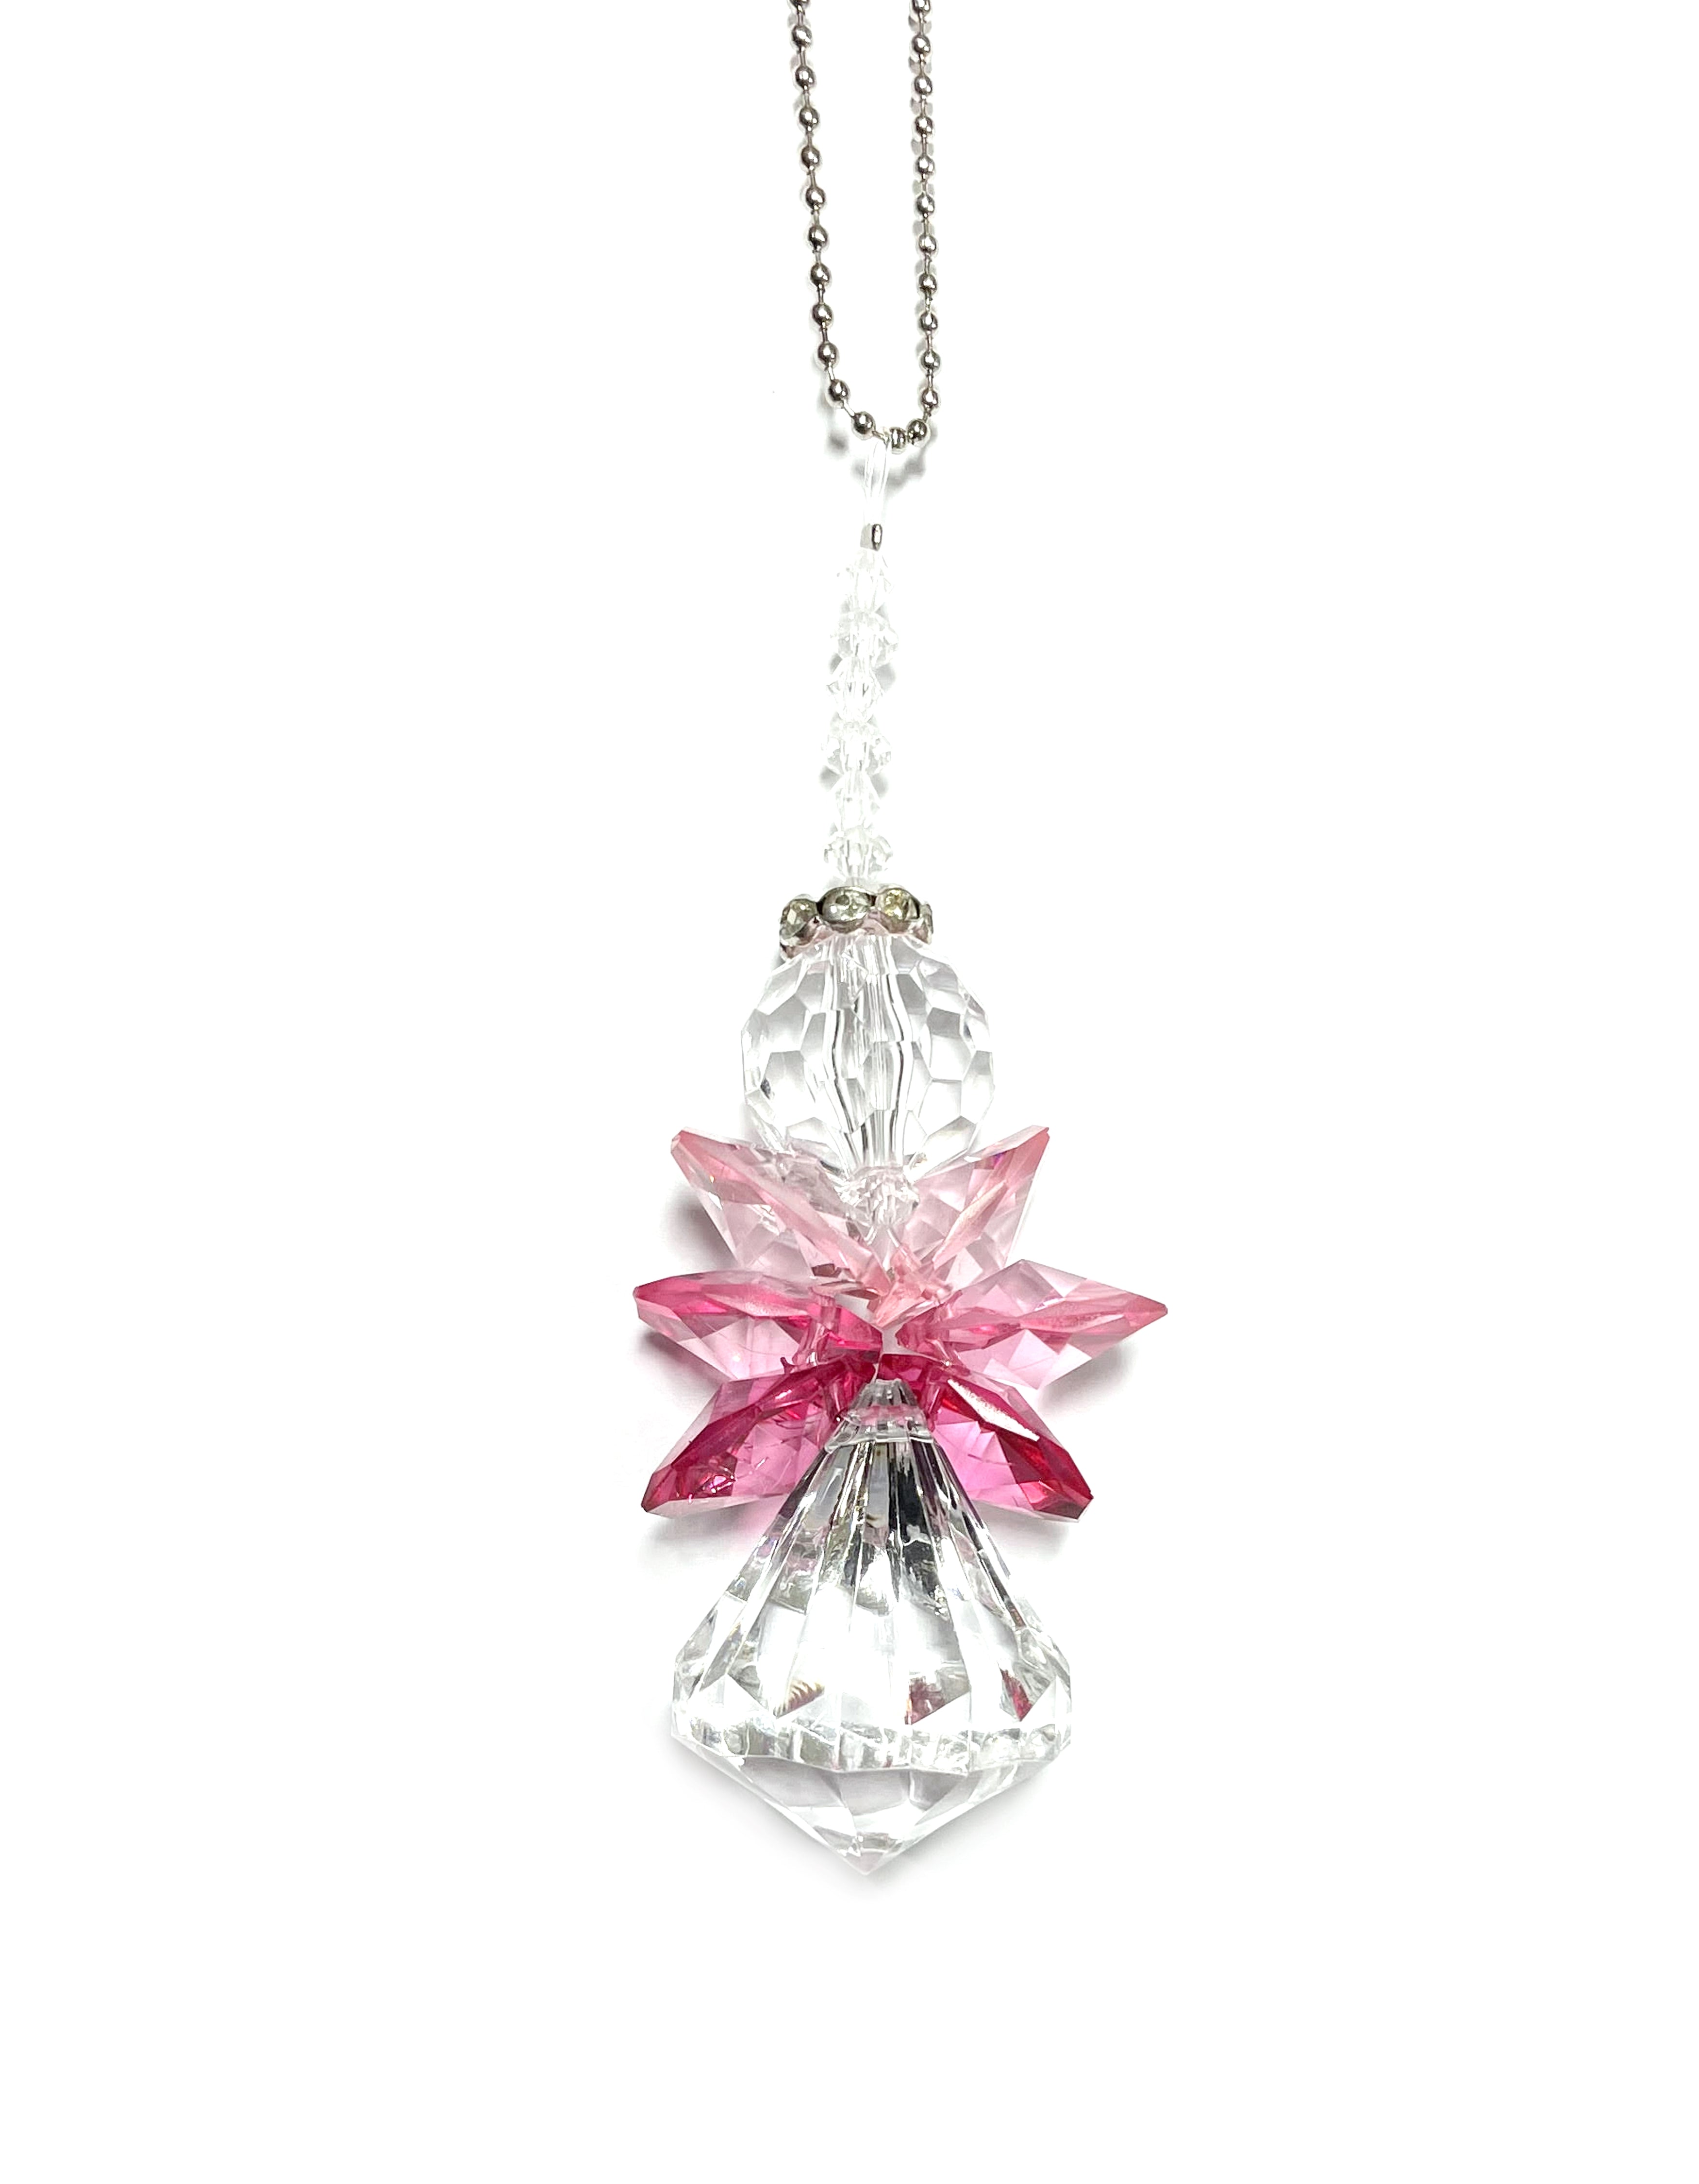 Hanging crystal angel, this is a special accessory to accompany you in your car made in a variety of colors